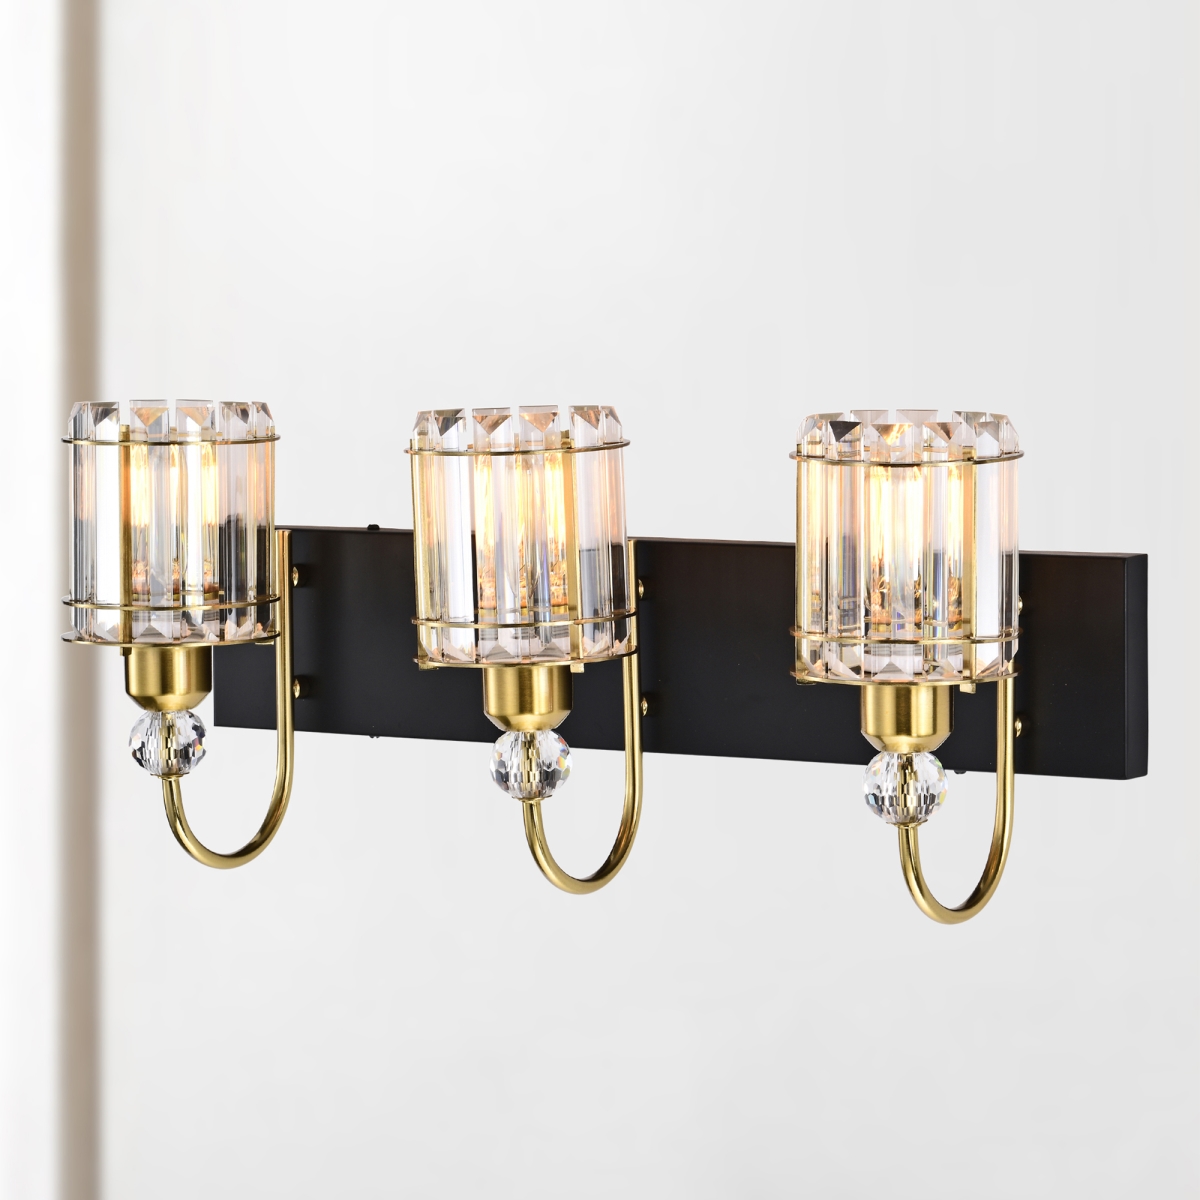 Gambit 22 in. 3-Light Indoor Matte Black and Brass Finish Wall Sconce with Light Kit